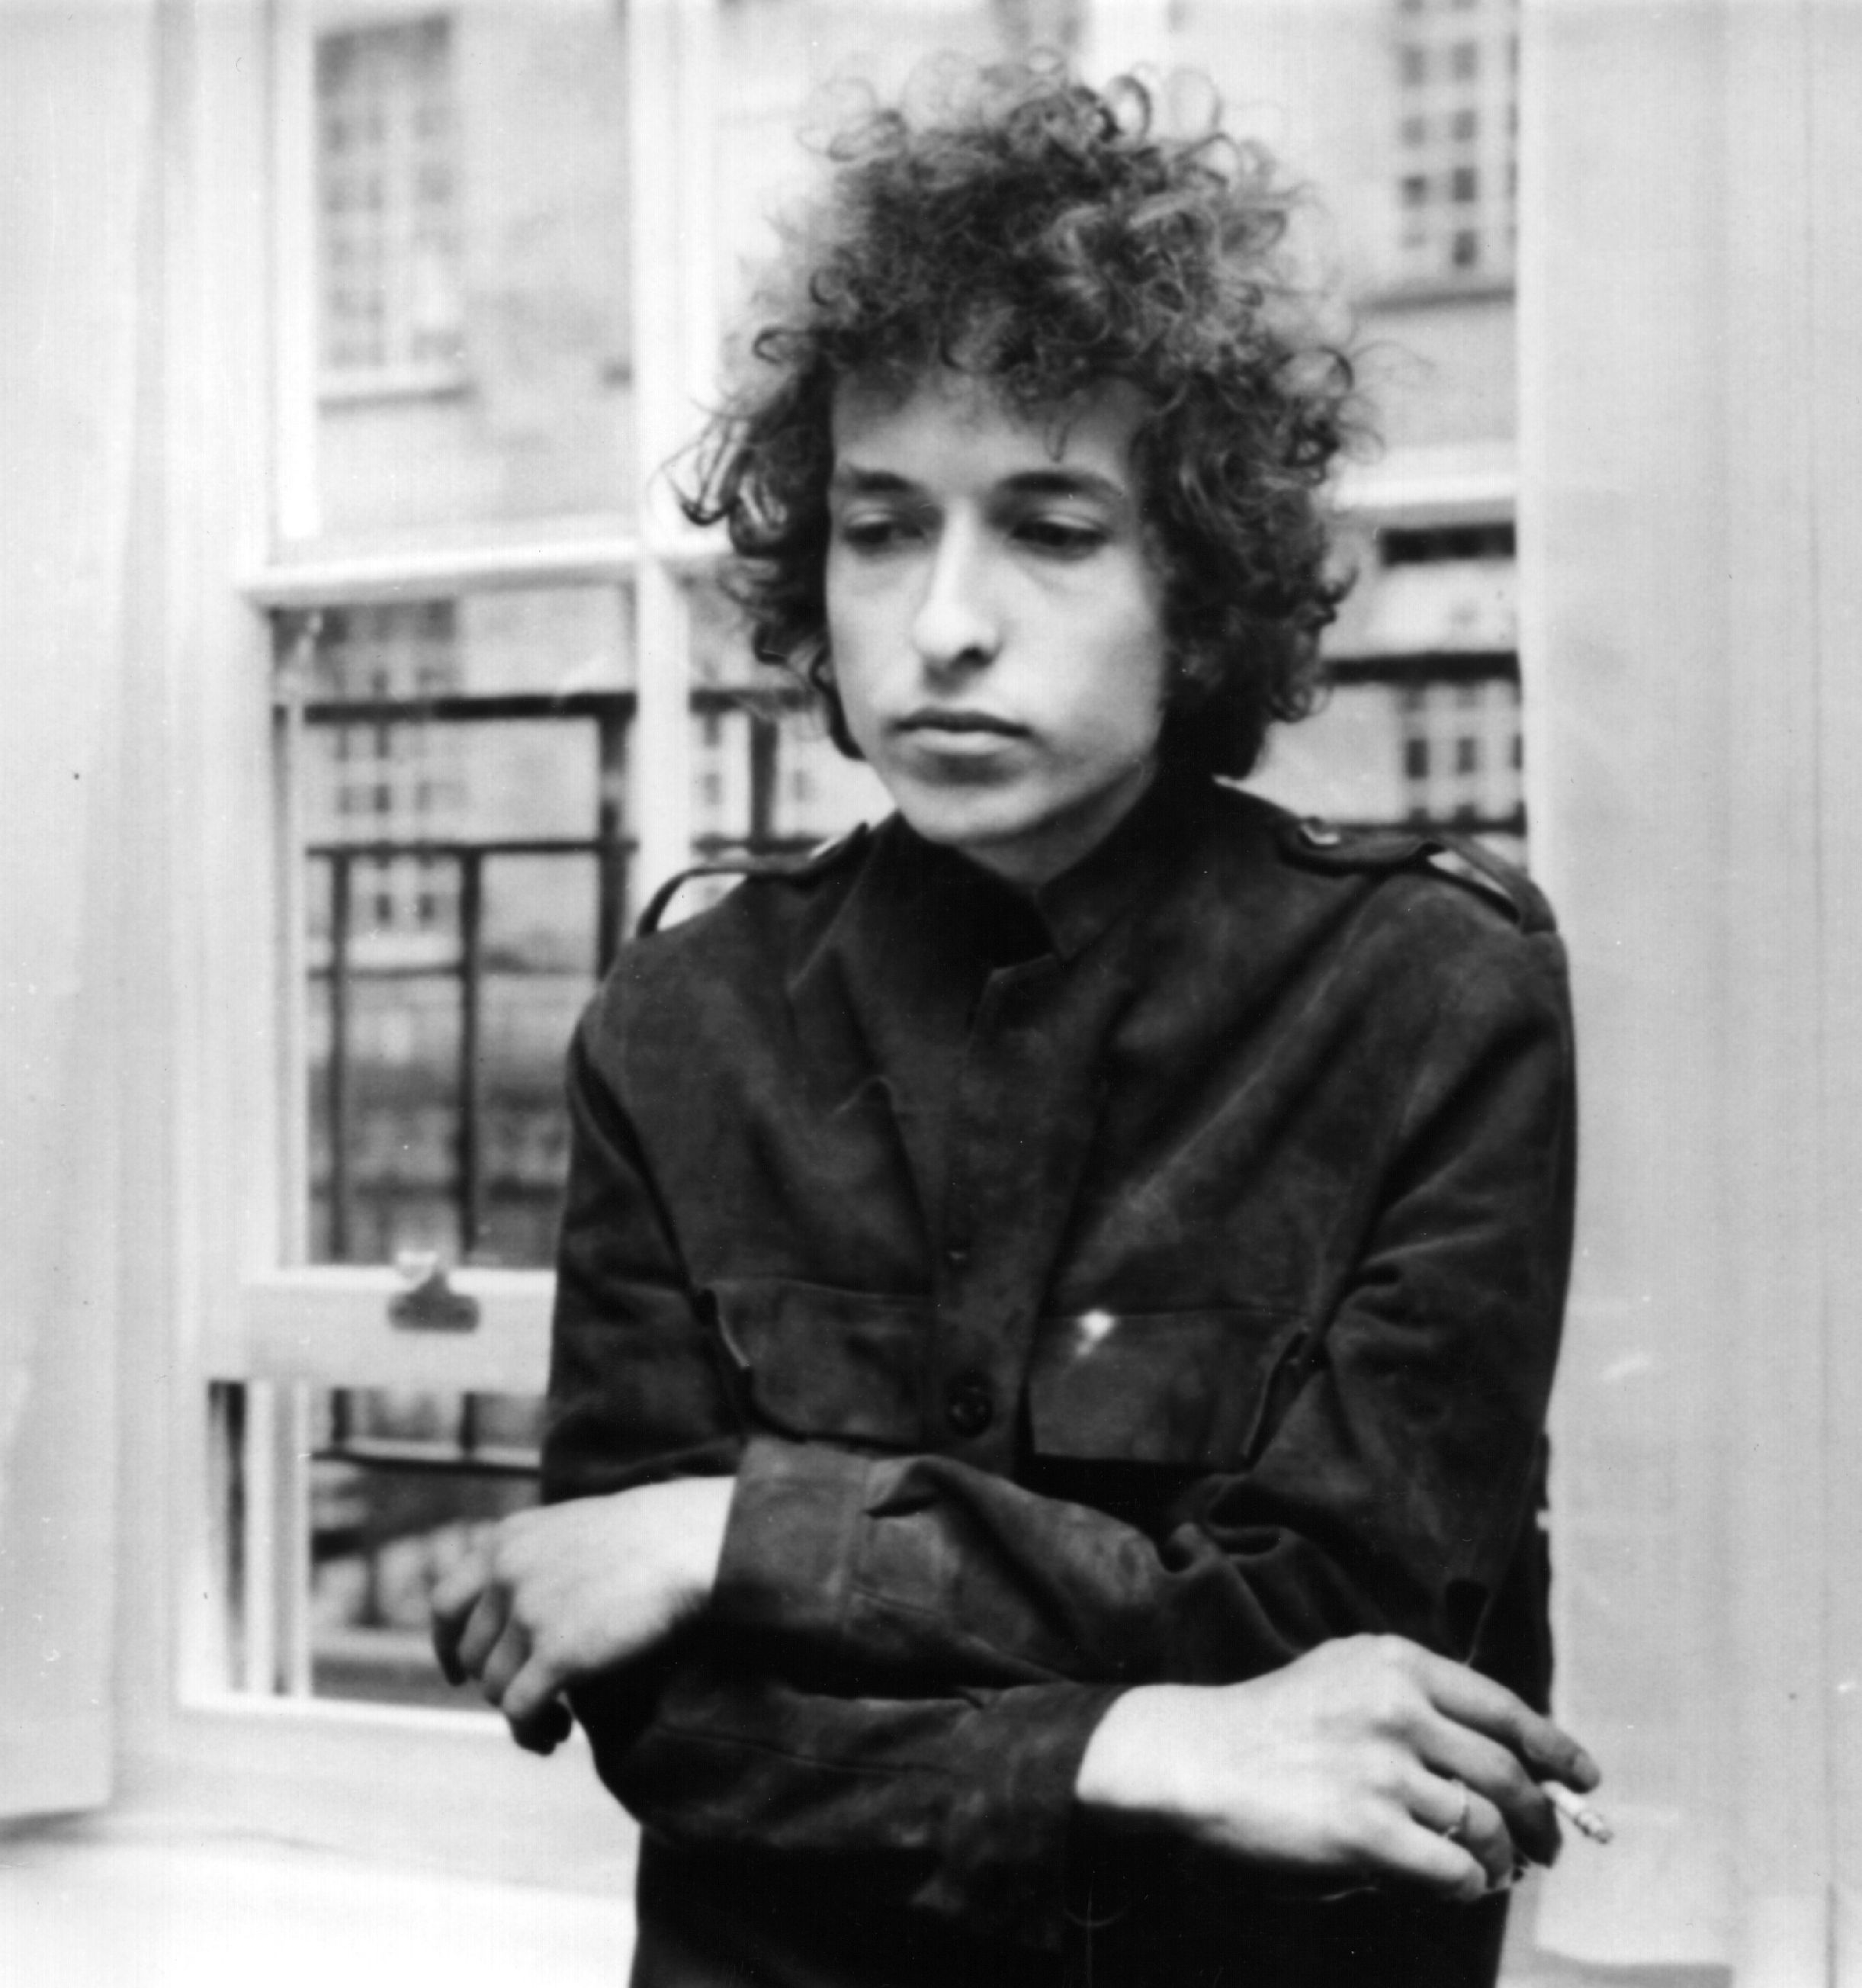 Bob Dylan Iphone Wallpapers